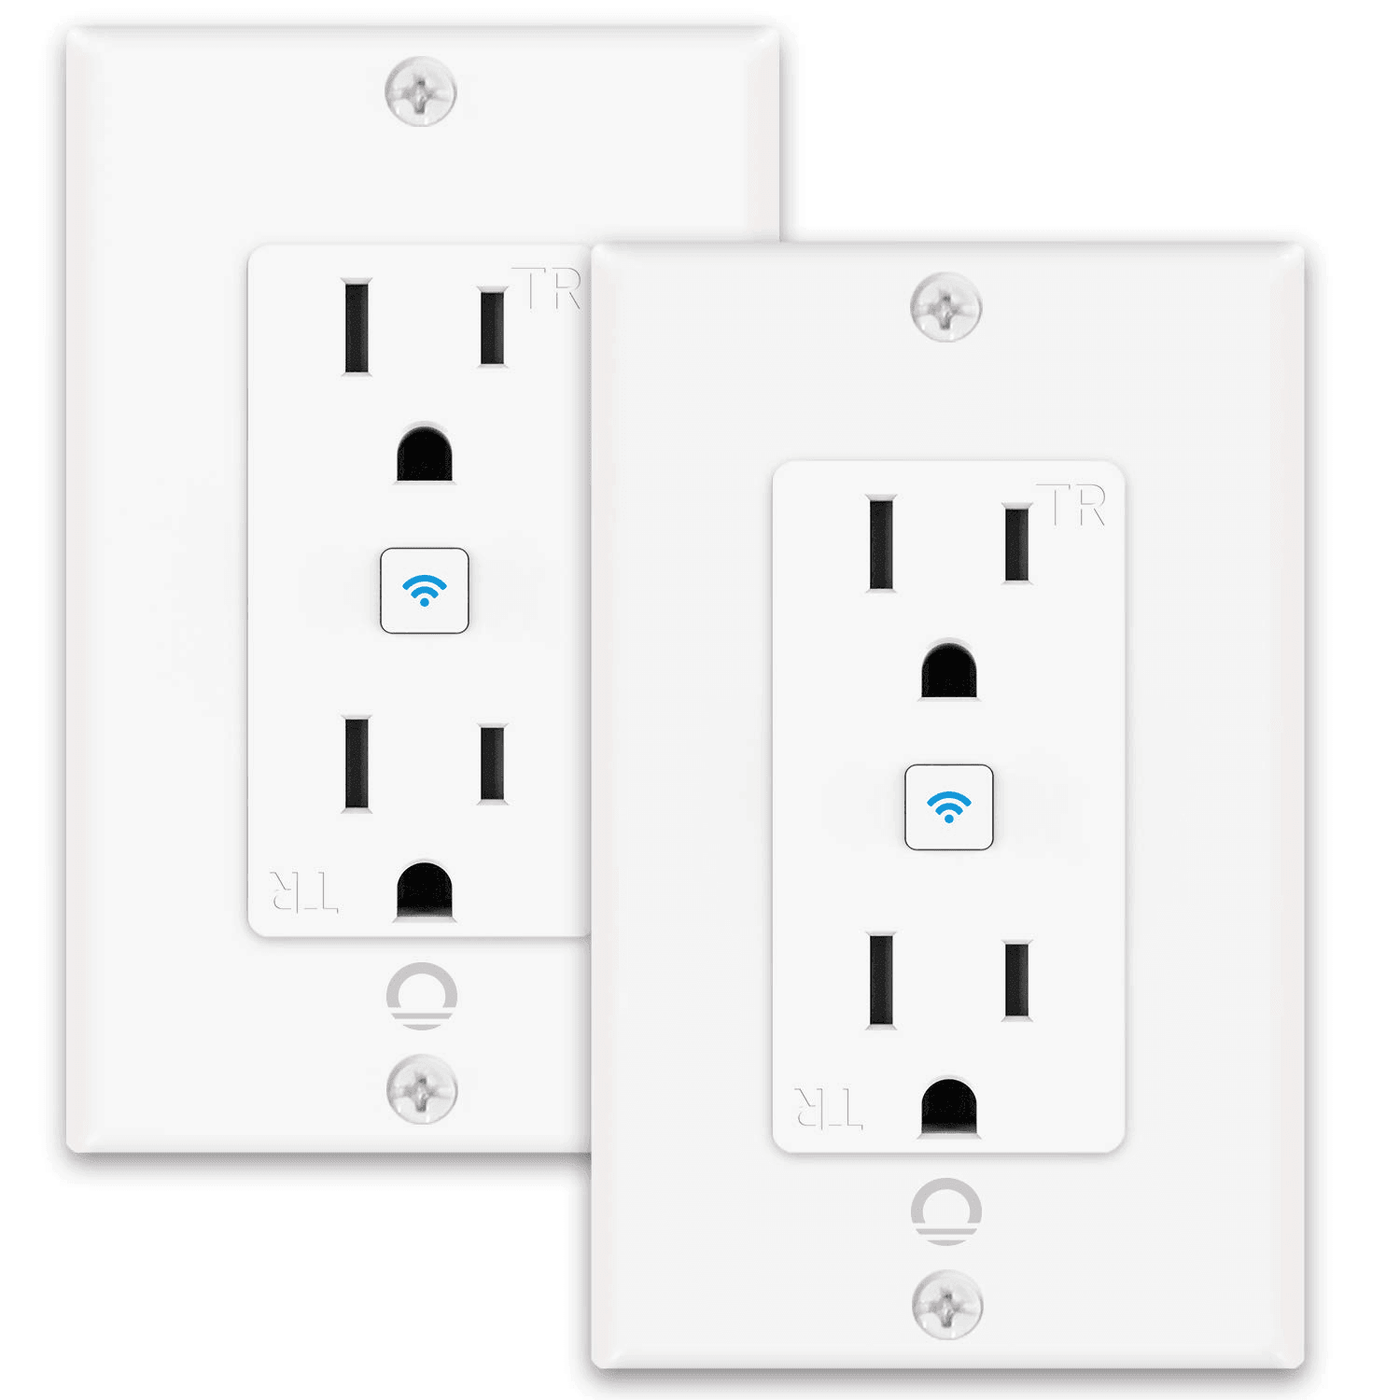 Lumary Smart Wi-Fi Outlet in Wall Plug Works with Alexa & Google Assistant 2PCS